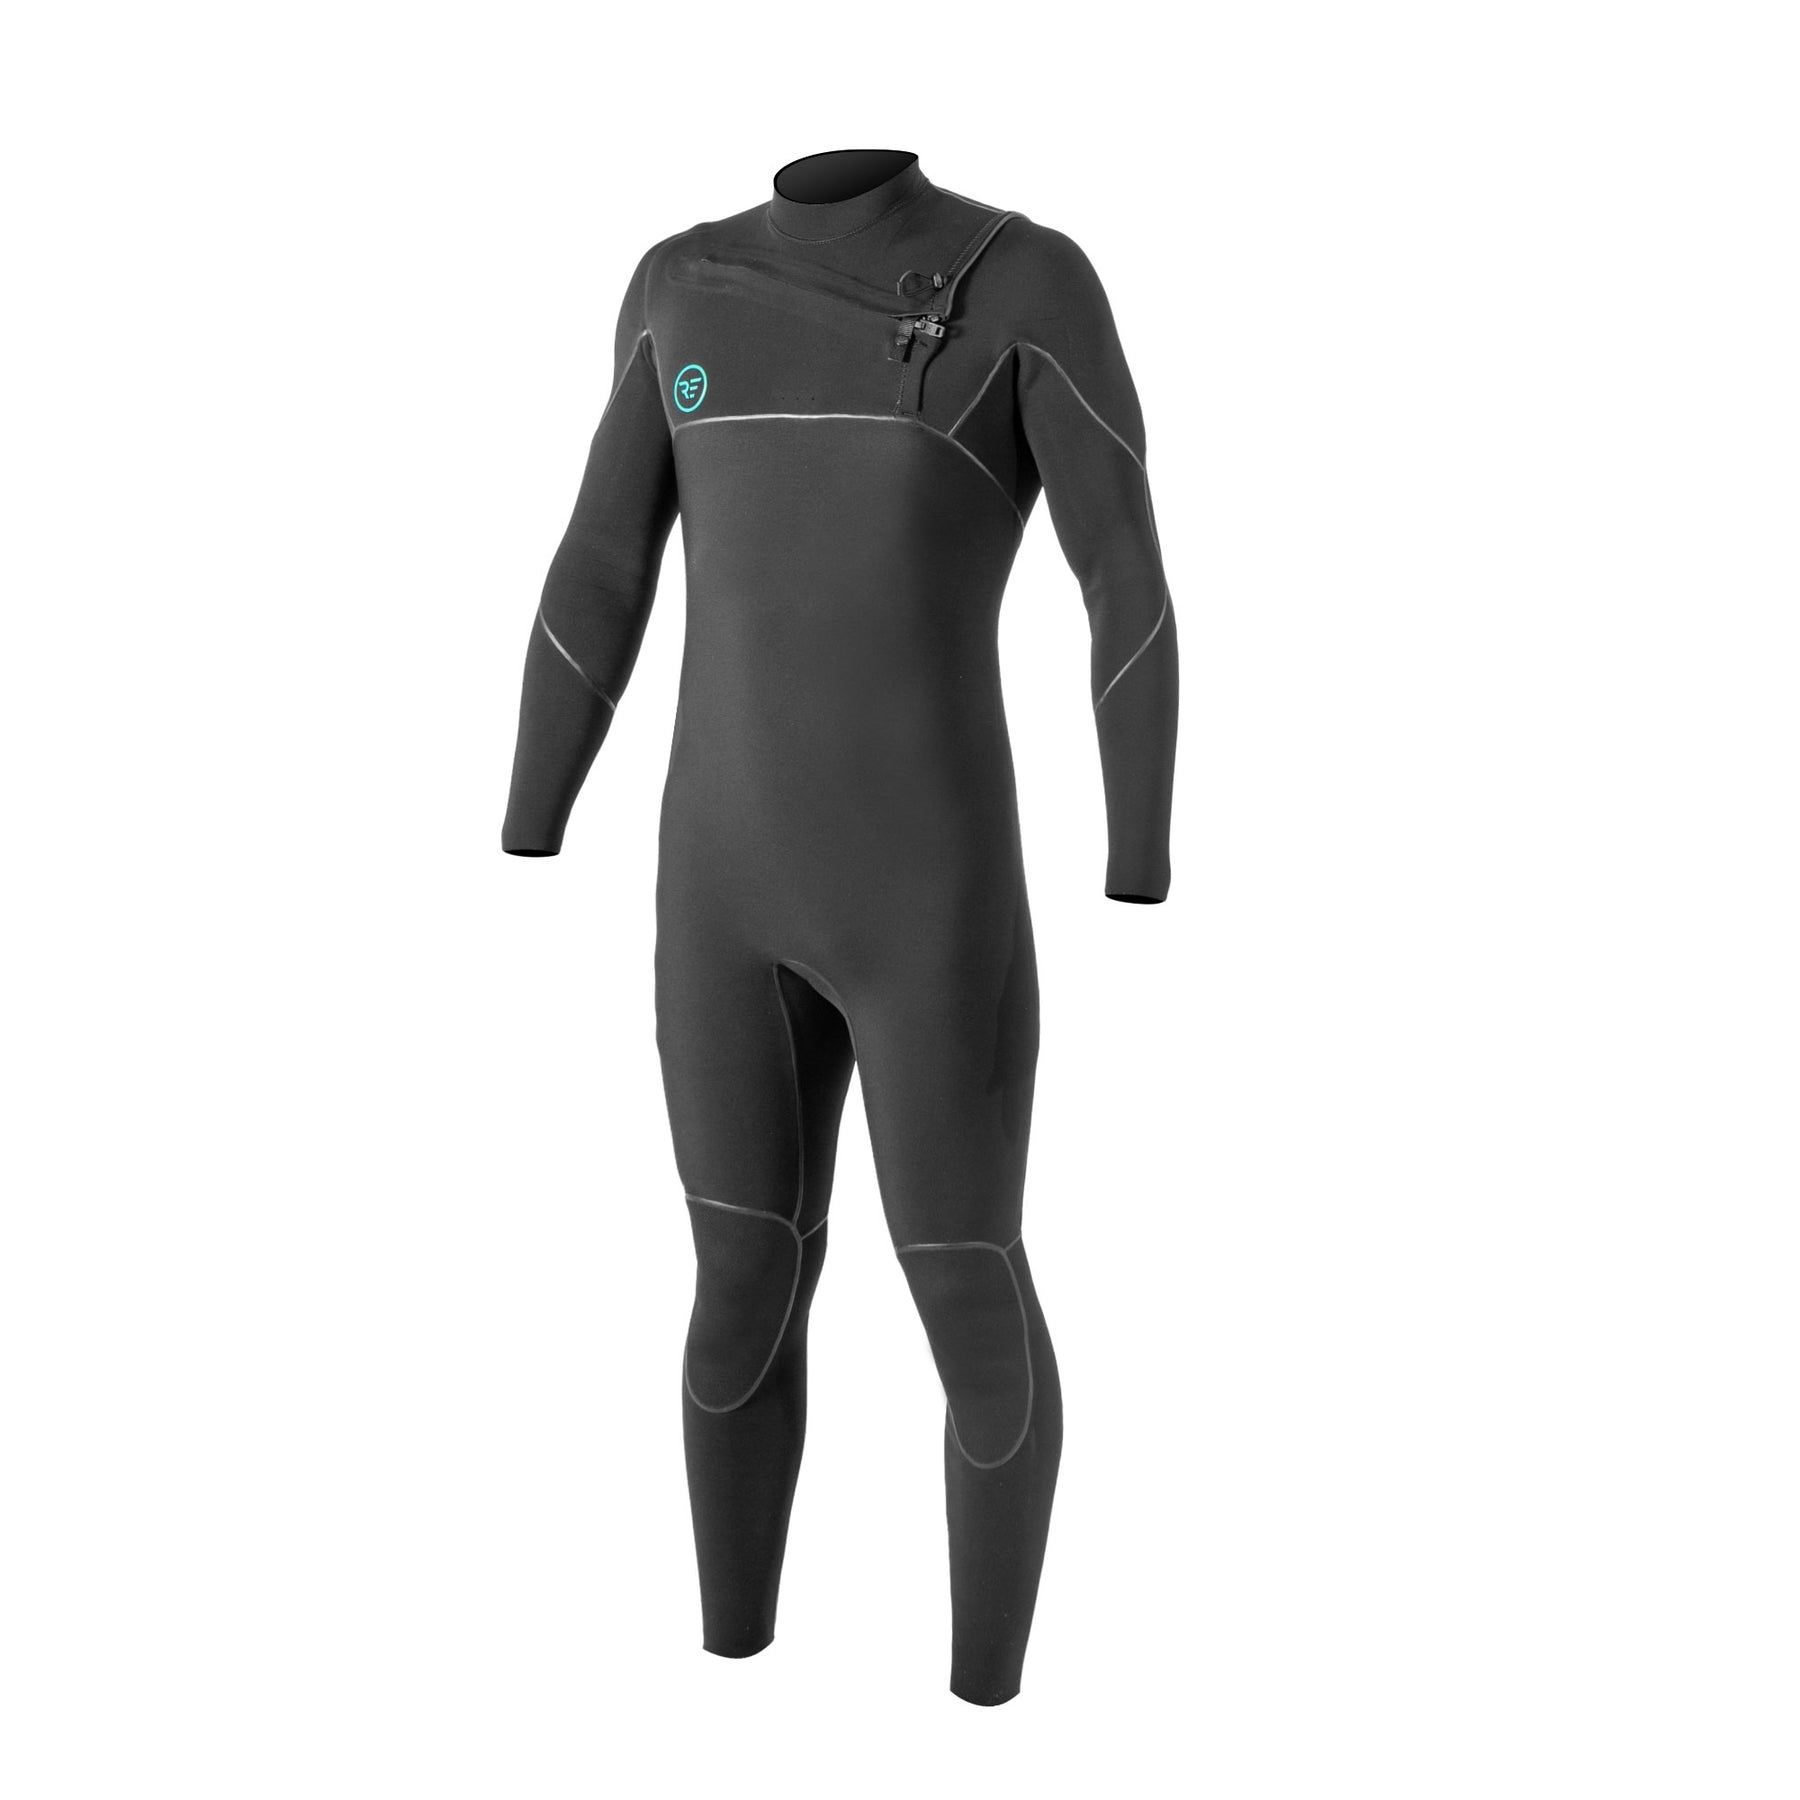 Ride Engine Apoc 4/3 FZ Wetsuit – XL – The Foiling Collective